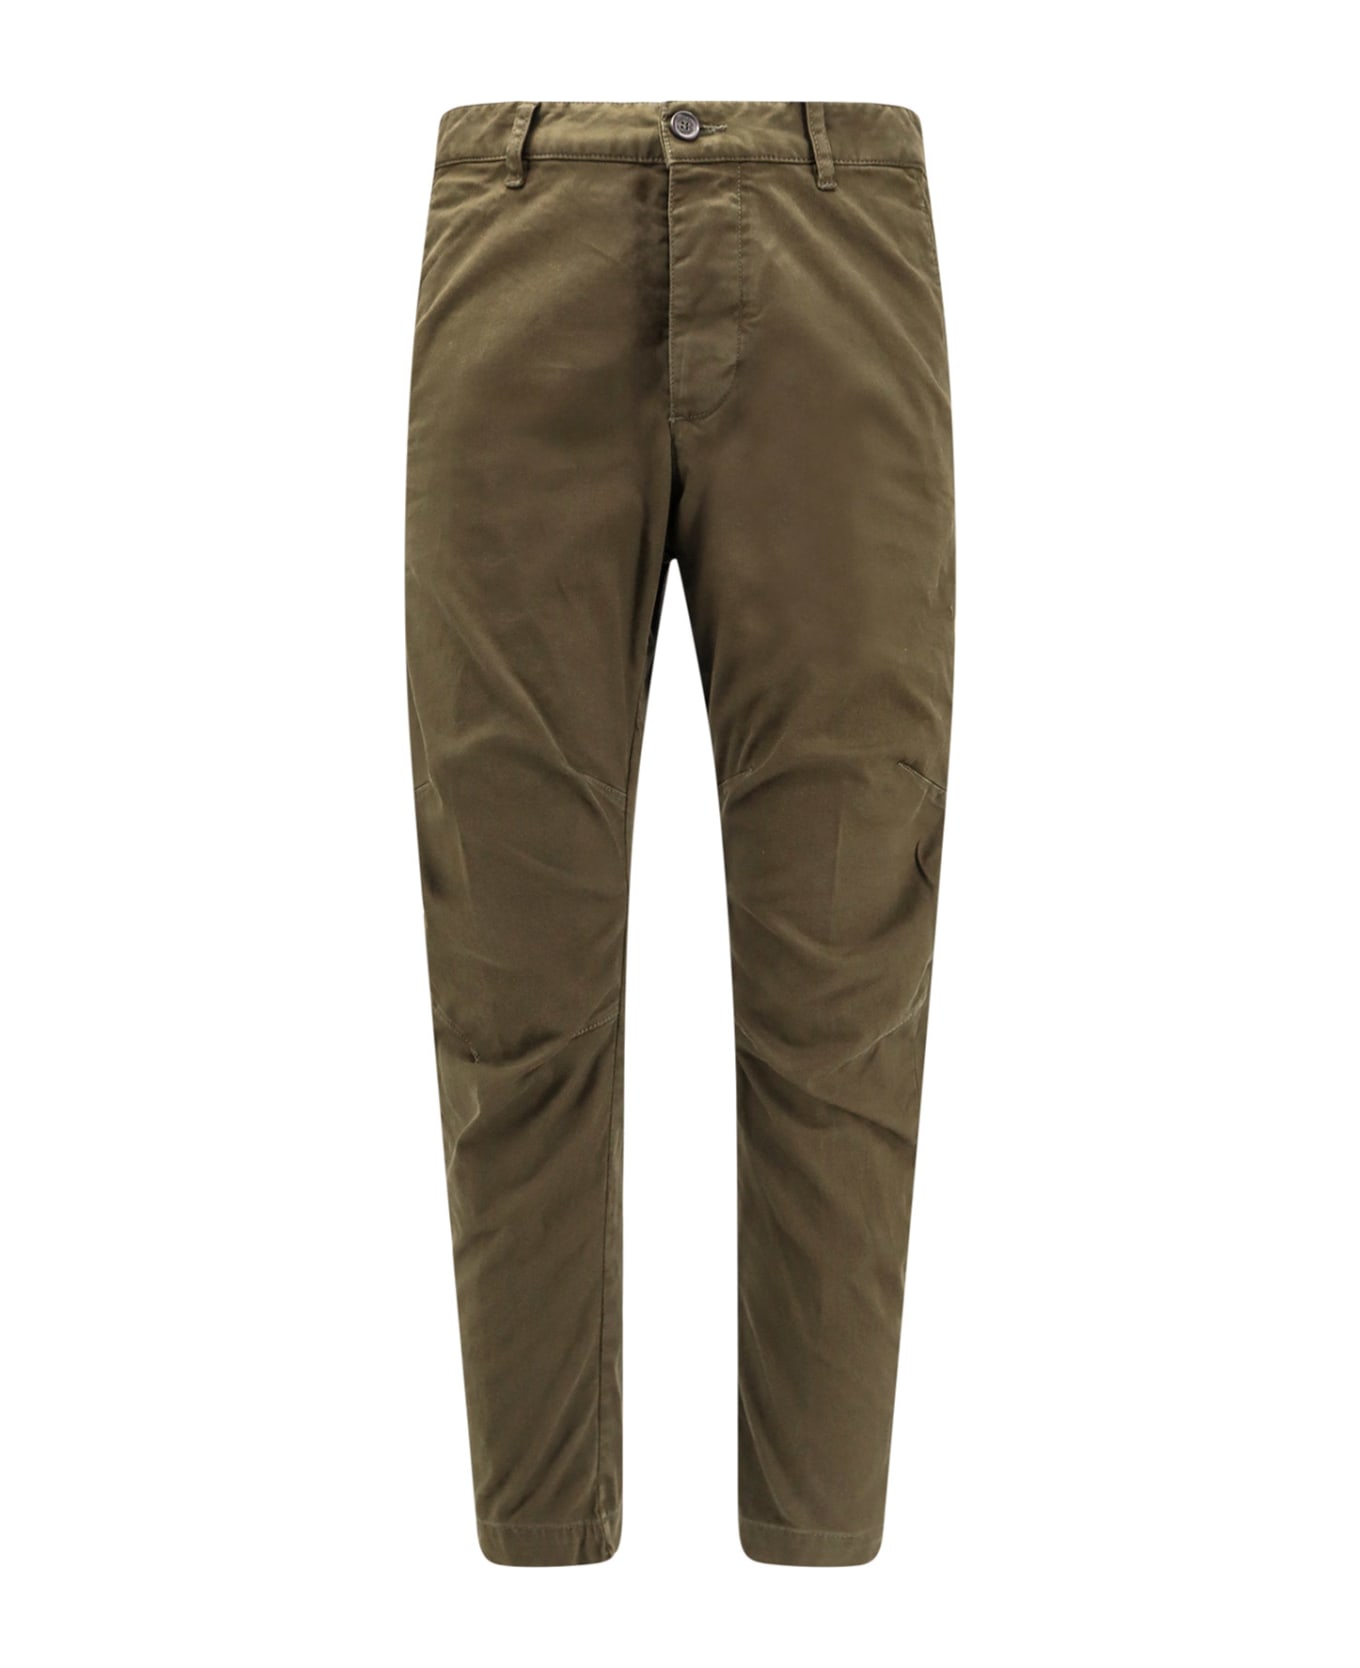 Dsquared2 Sexy Chino Trouser - Green ボトムス